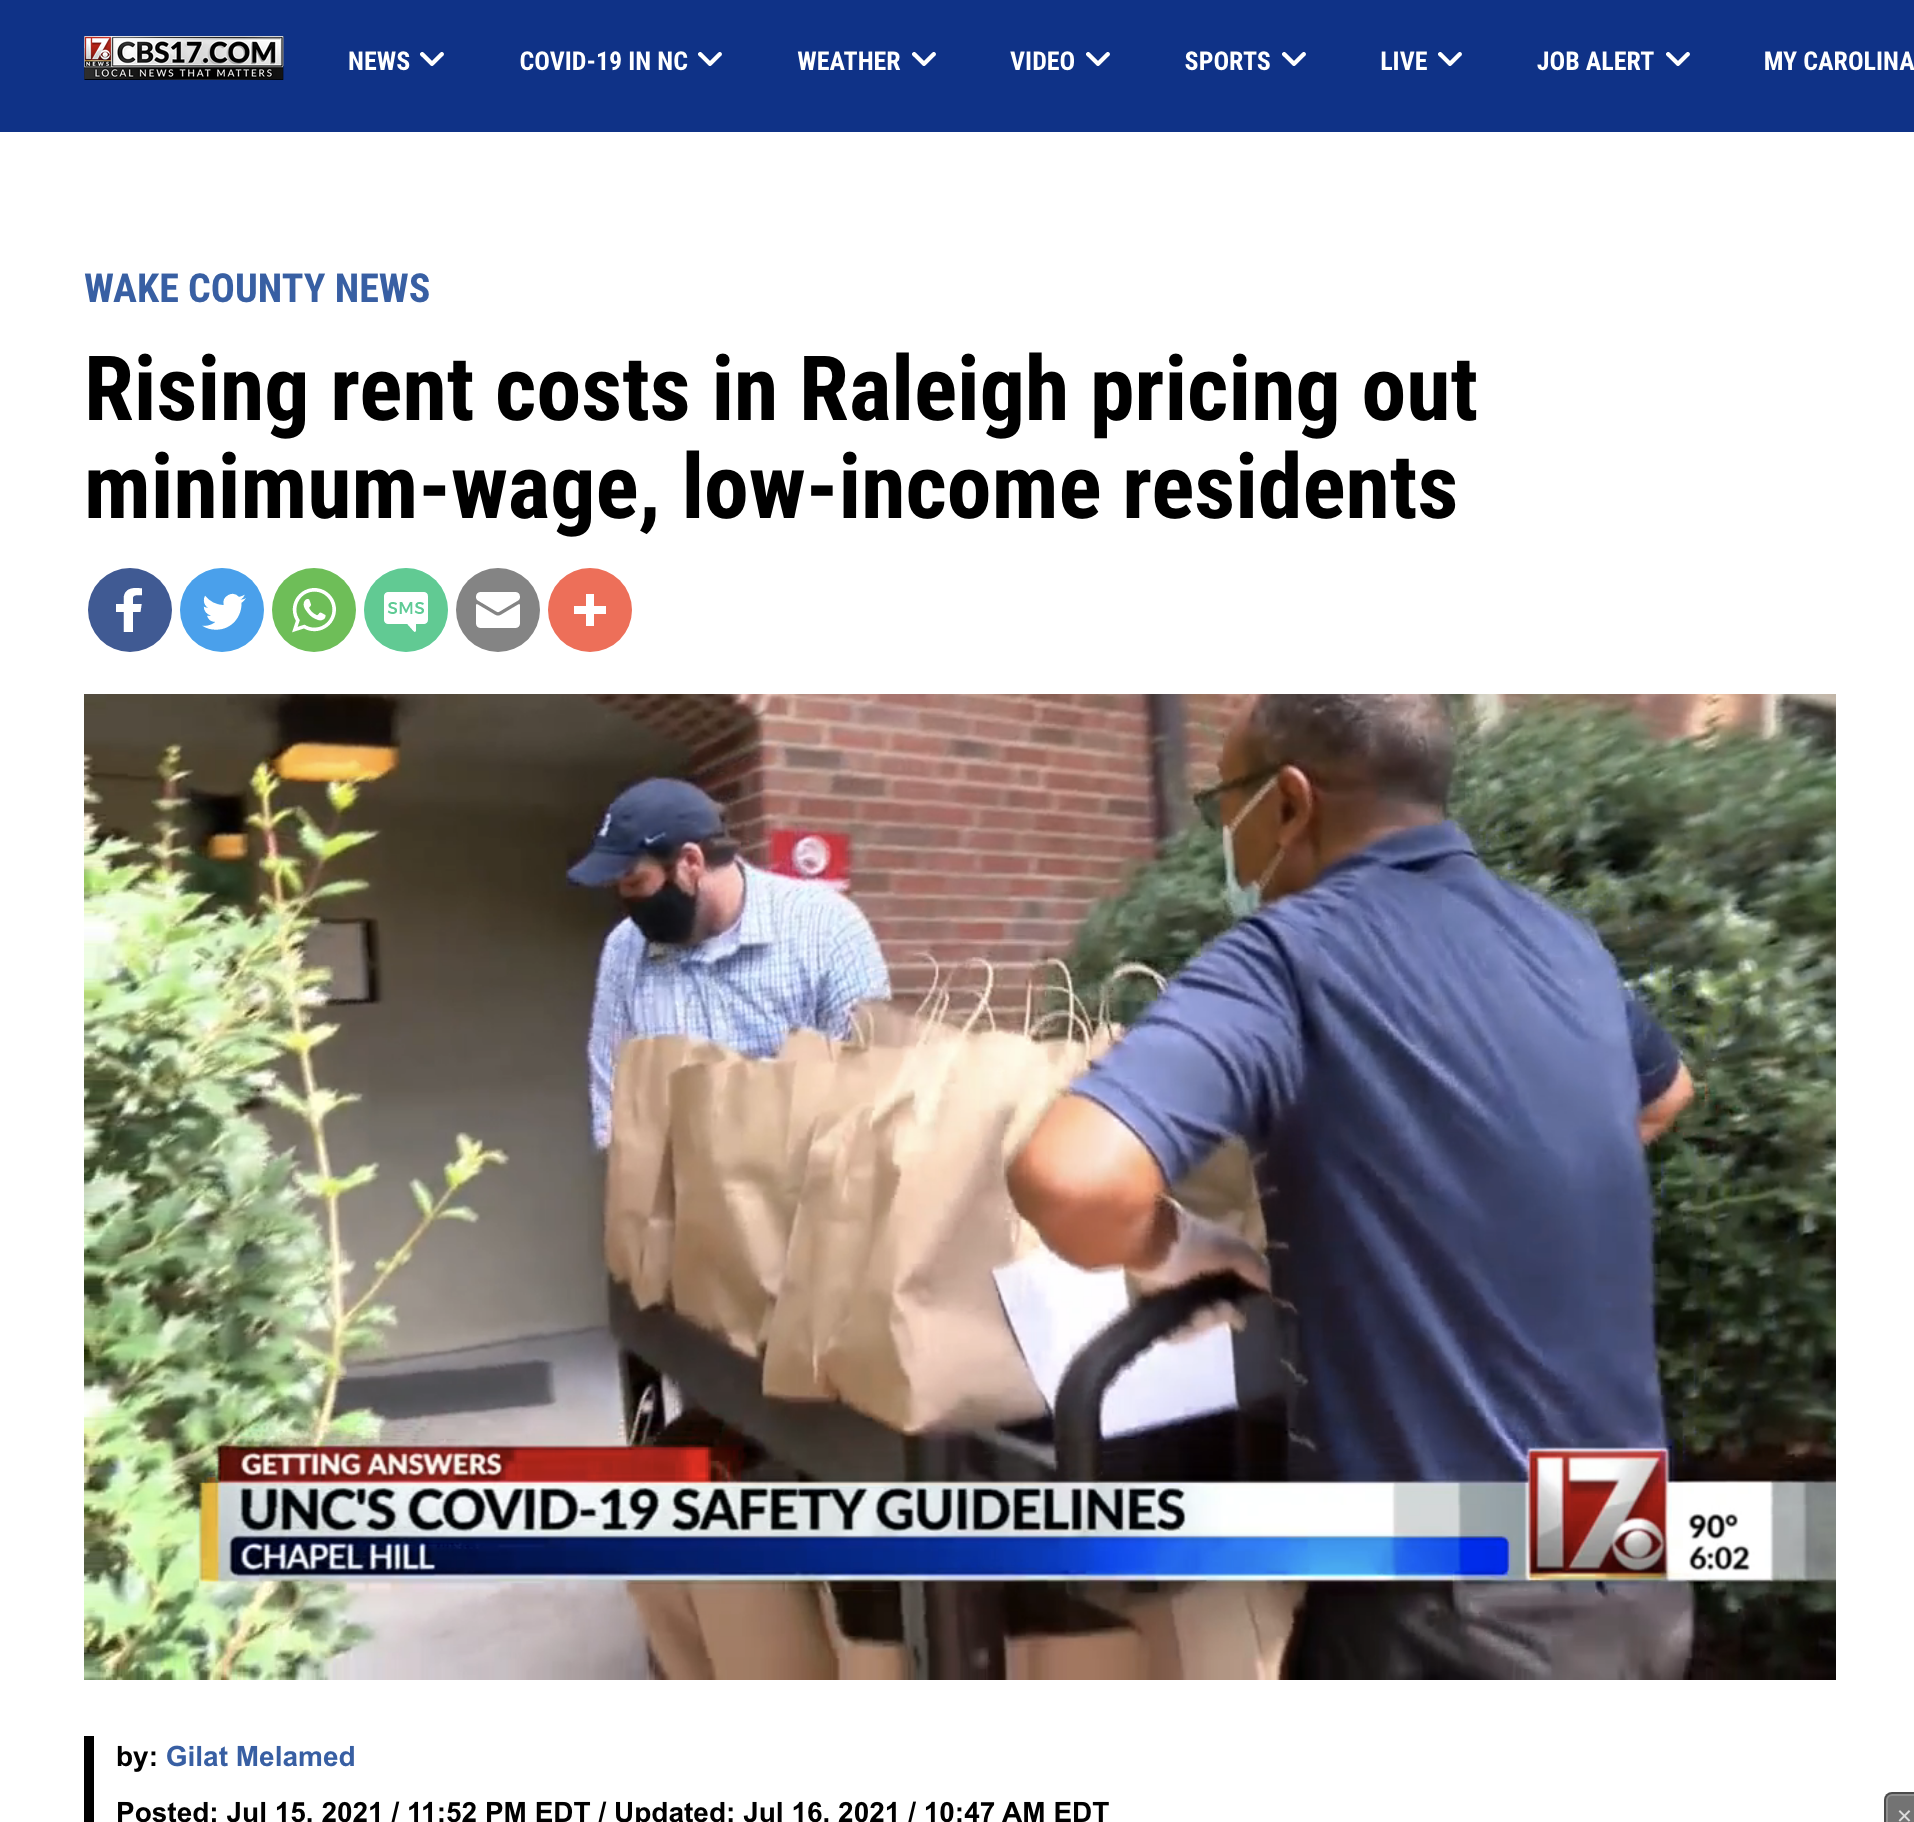 The headline from CBS 17 reads,"Rising rent costs in Raleigh pricing out minimum-wage, low-income residents."